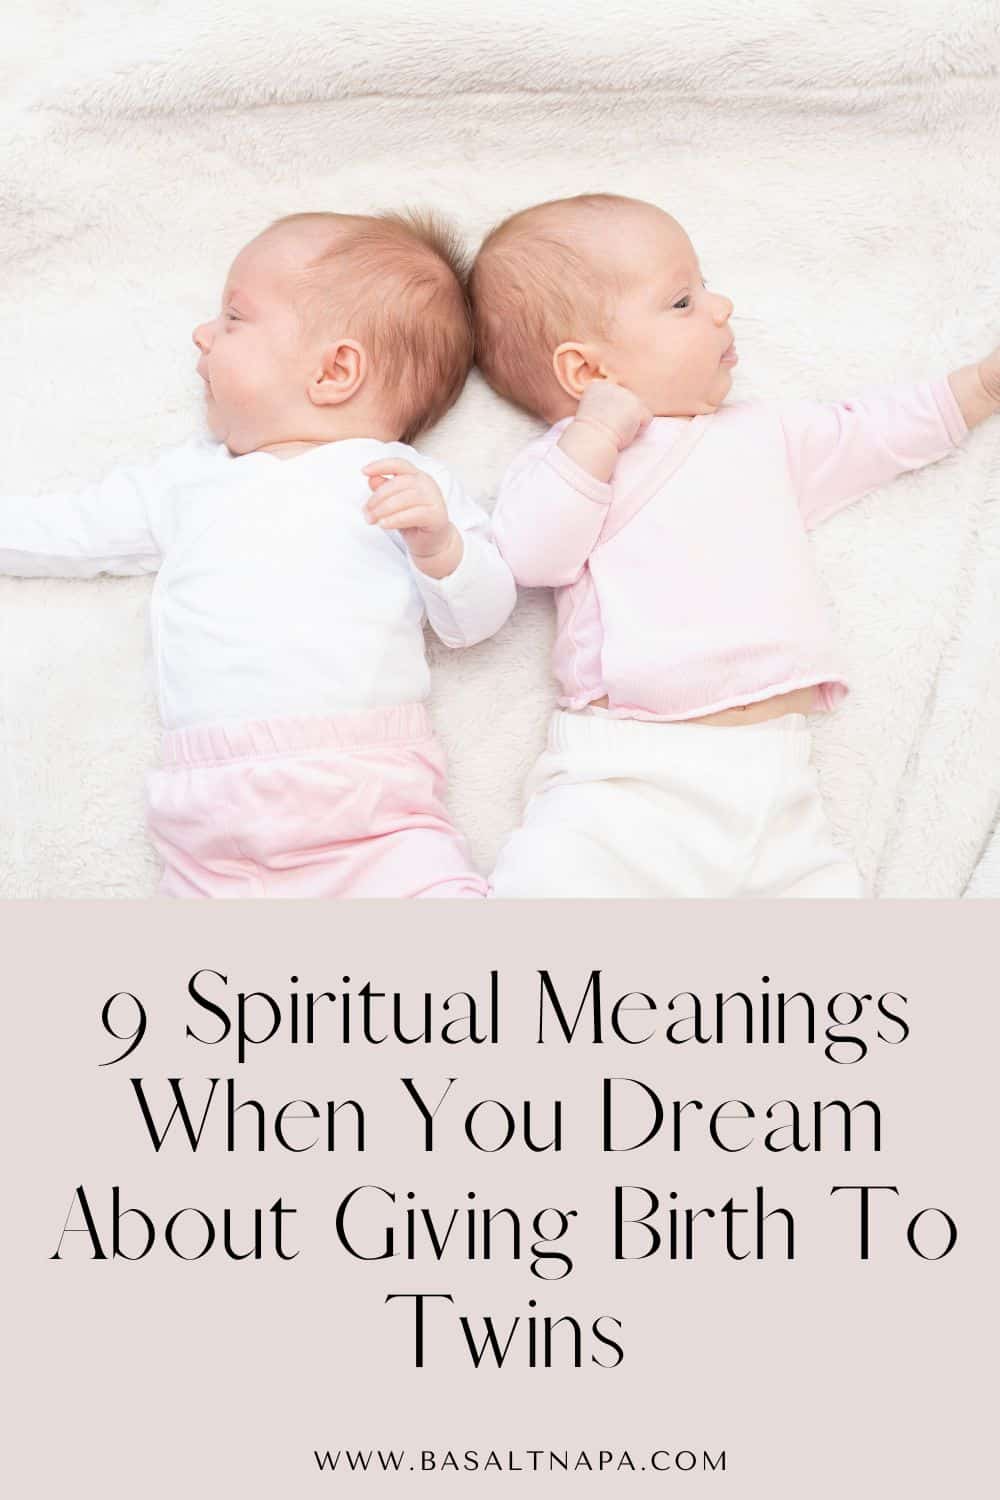 9 Spiritual Meanings When You Dream About Giving Birth To Twins